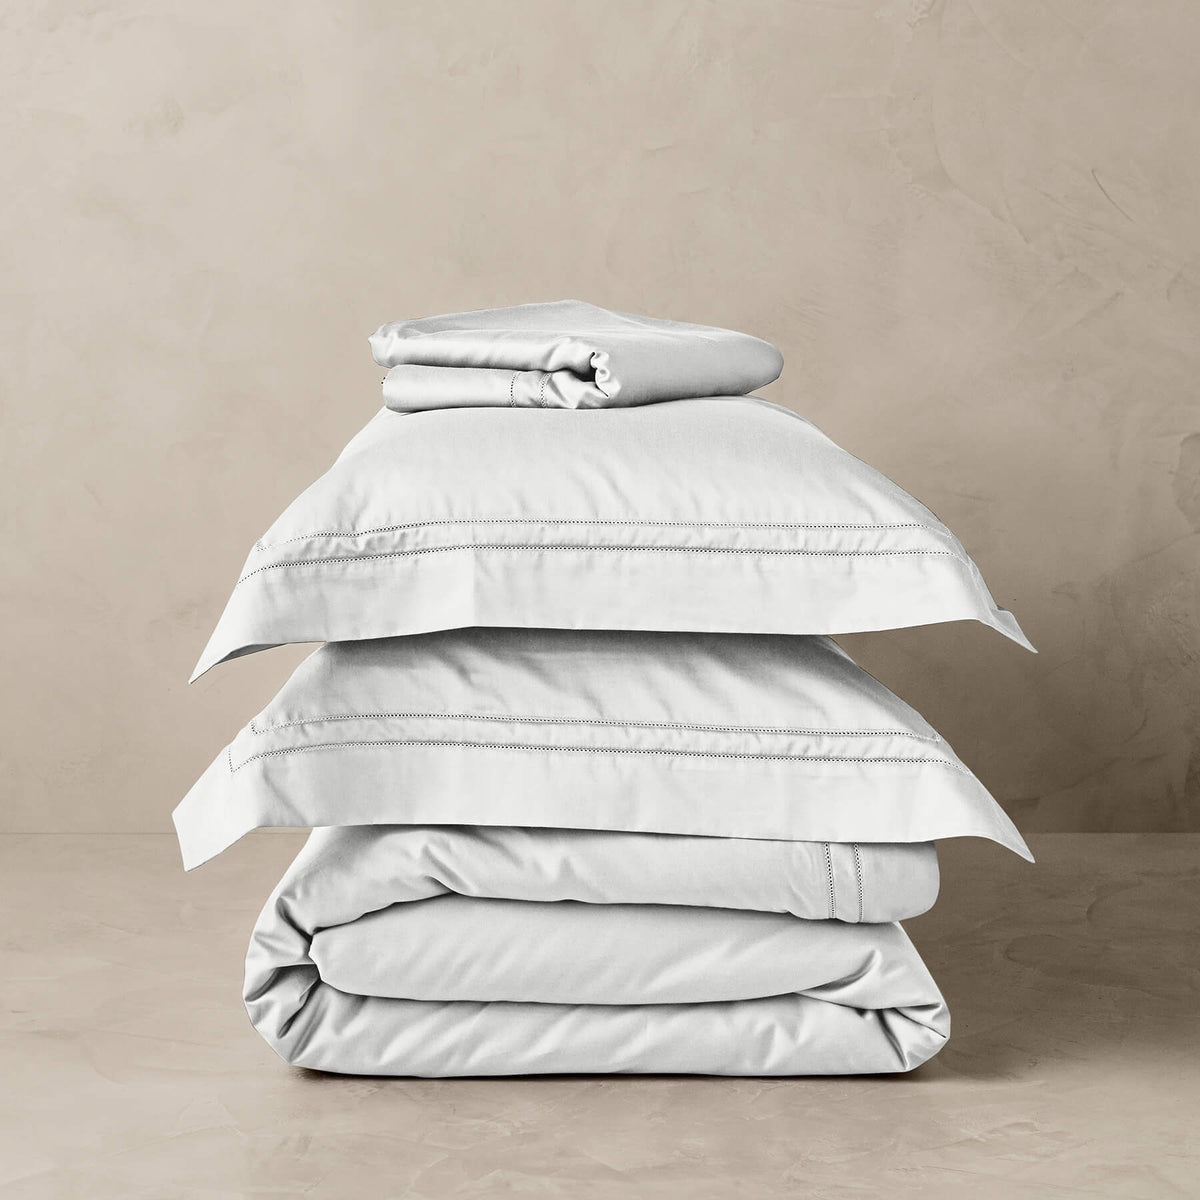 Kings & Queens Egyptian Cotton Classic Hemstitch Starter Bundle Set in White Bedding Set